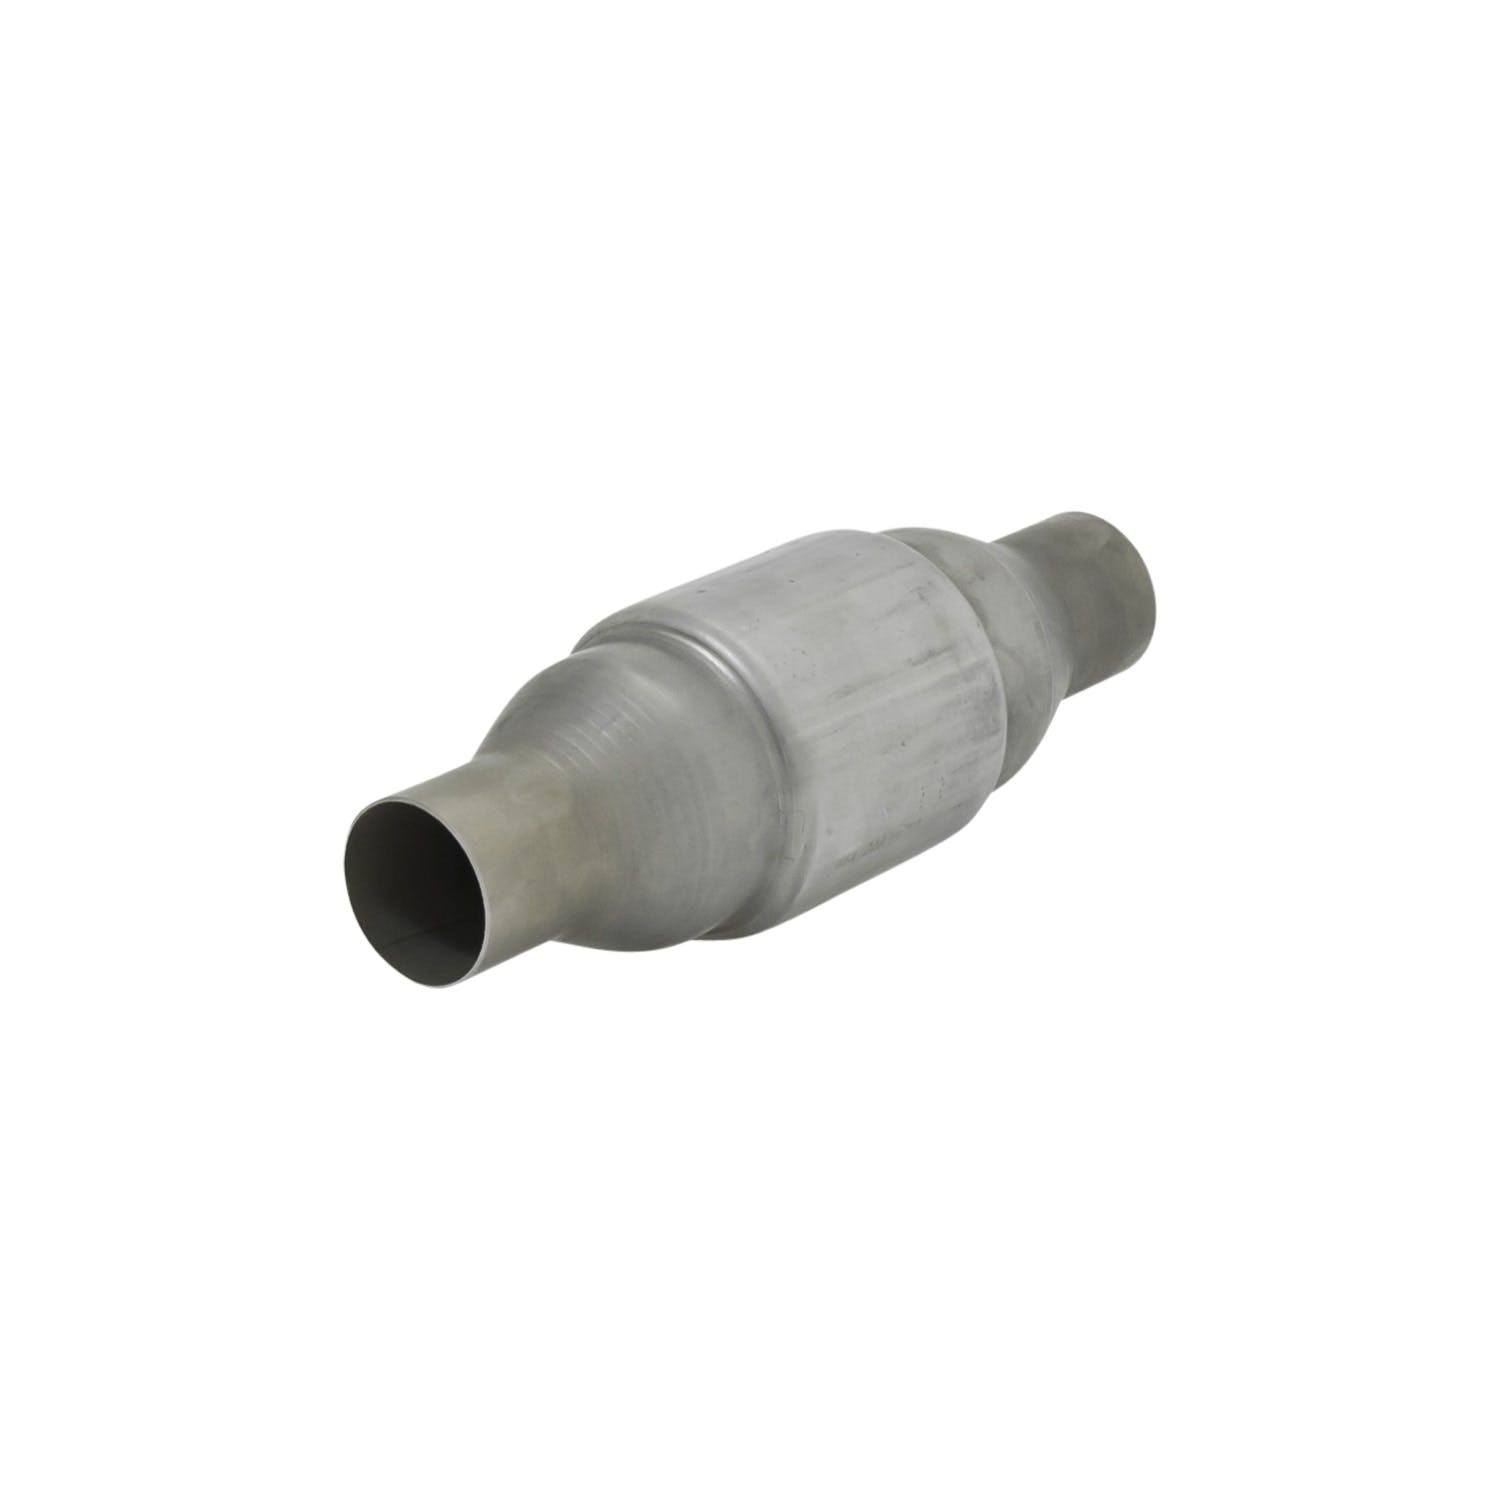 Flowmaster Catalytic Converters 2000120 Catalytic Converter-Universal-200 Series-2.00 in. Inlet/Outlet-49 State